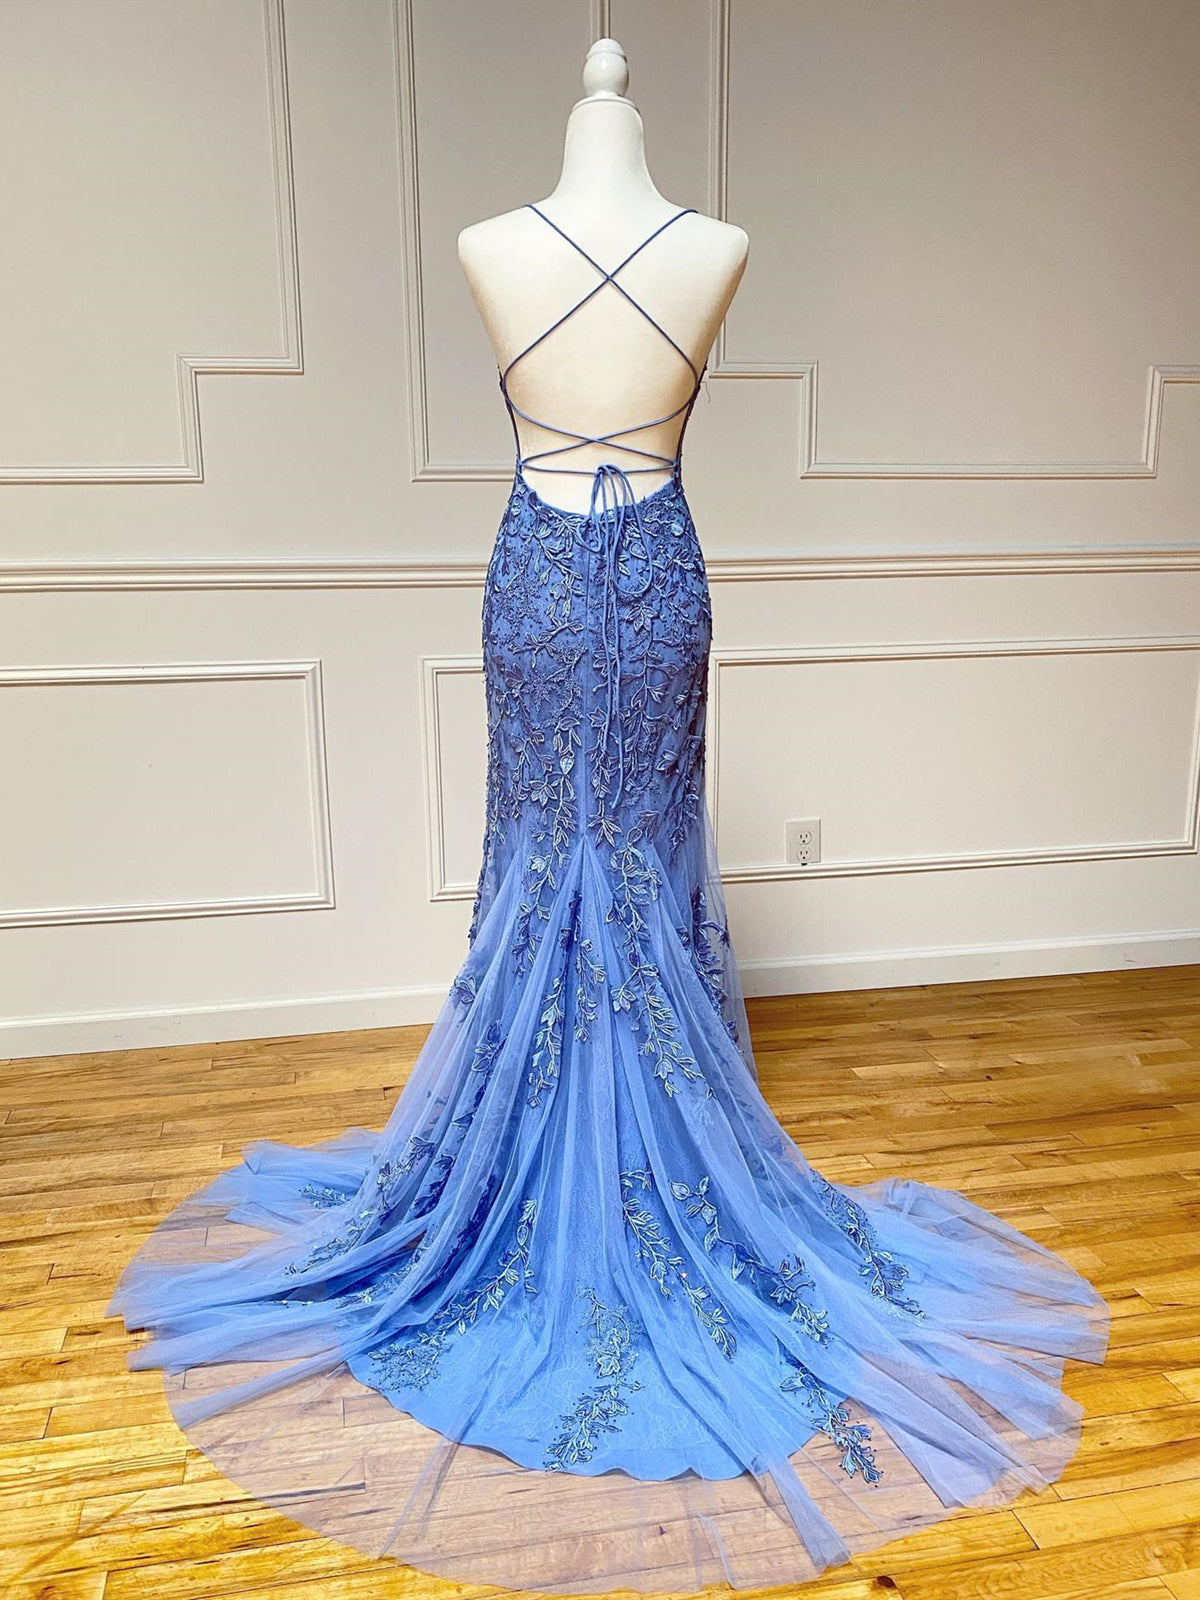 Party Dresses Night Out, Backless Blue Lace Mermaid Prom Dresses, Open Back Lace Mermaid Formal Evening Dresses